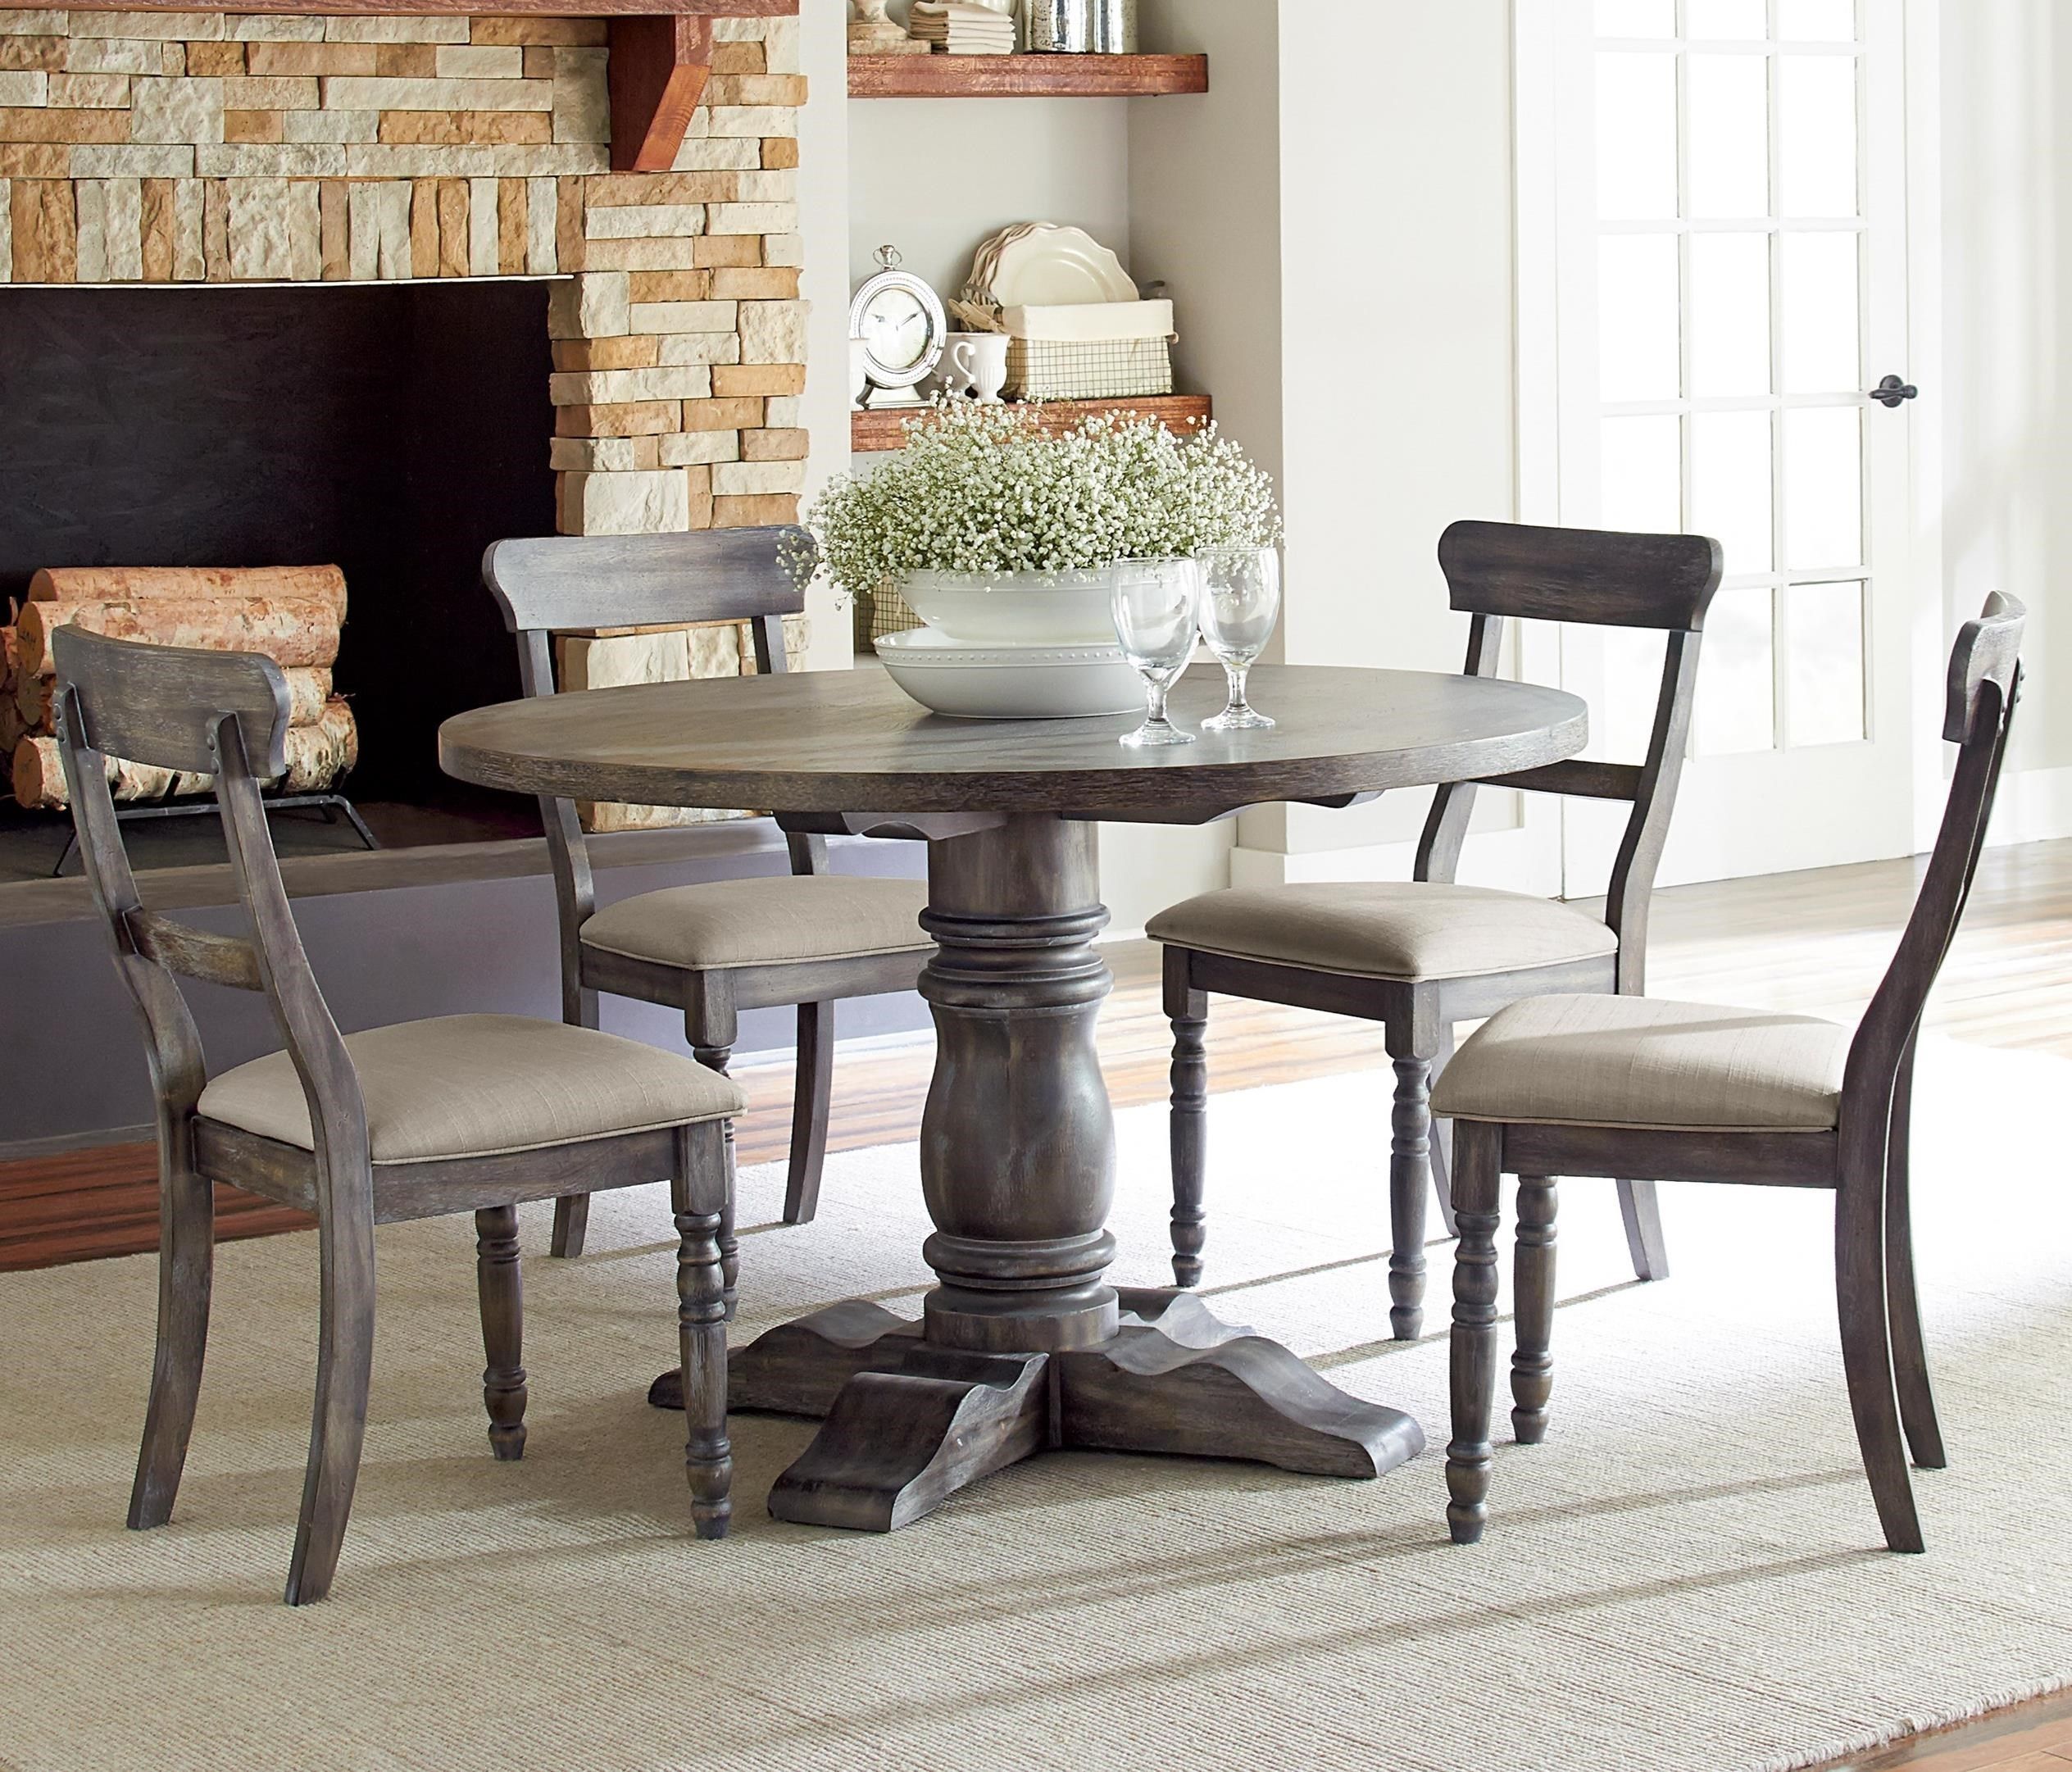 Widely Used Lindy Dove Grey Side Chairs With Regard To Progressive Furniture Muses 5 Piece Round Dining Table Set With (View 19 of 20)